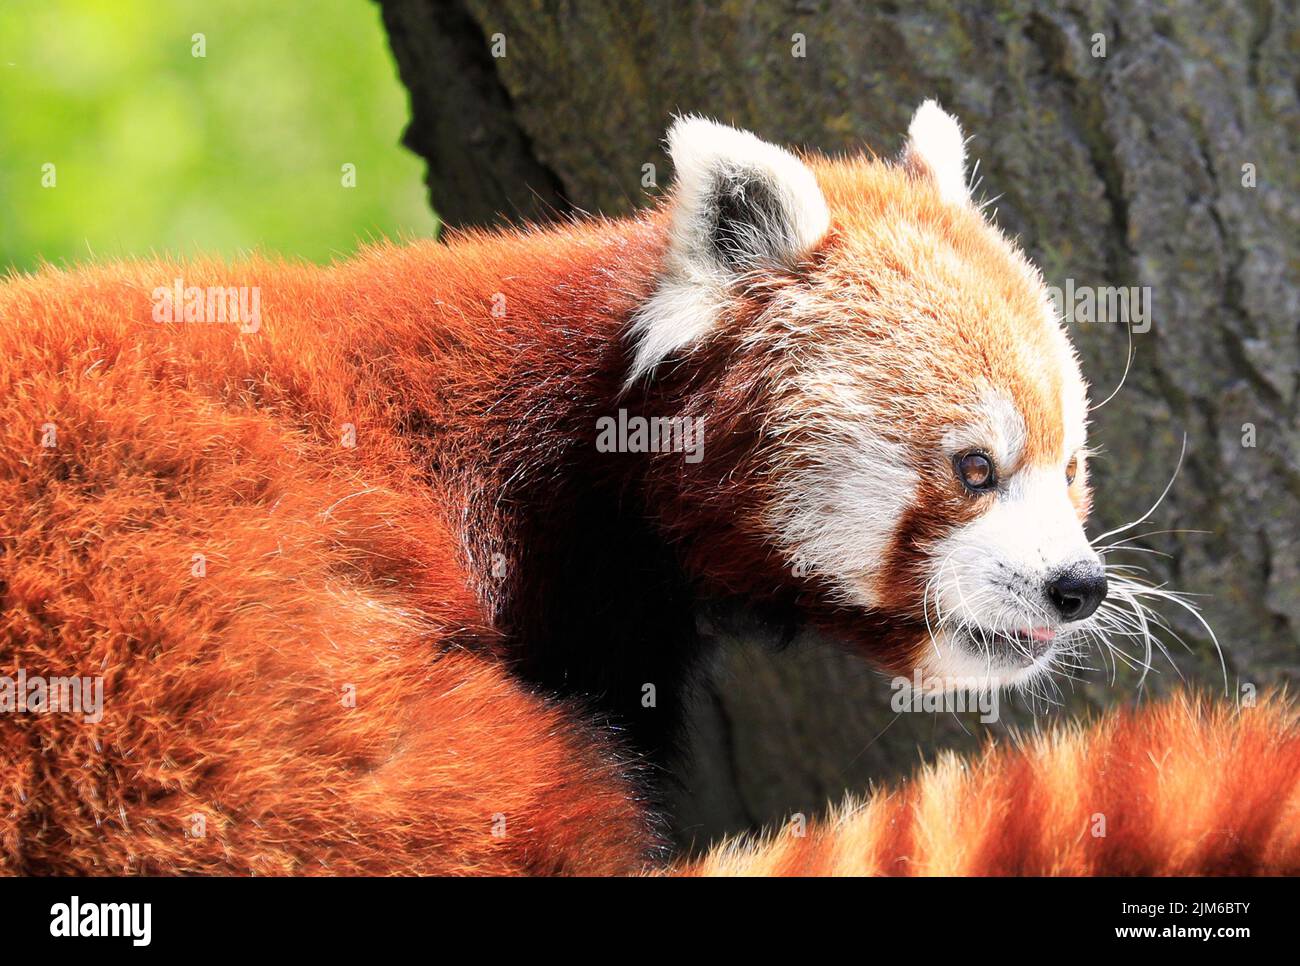 Red Panda bear portrait close-up sitting on a tree with green background Stock Photo